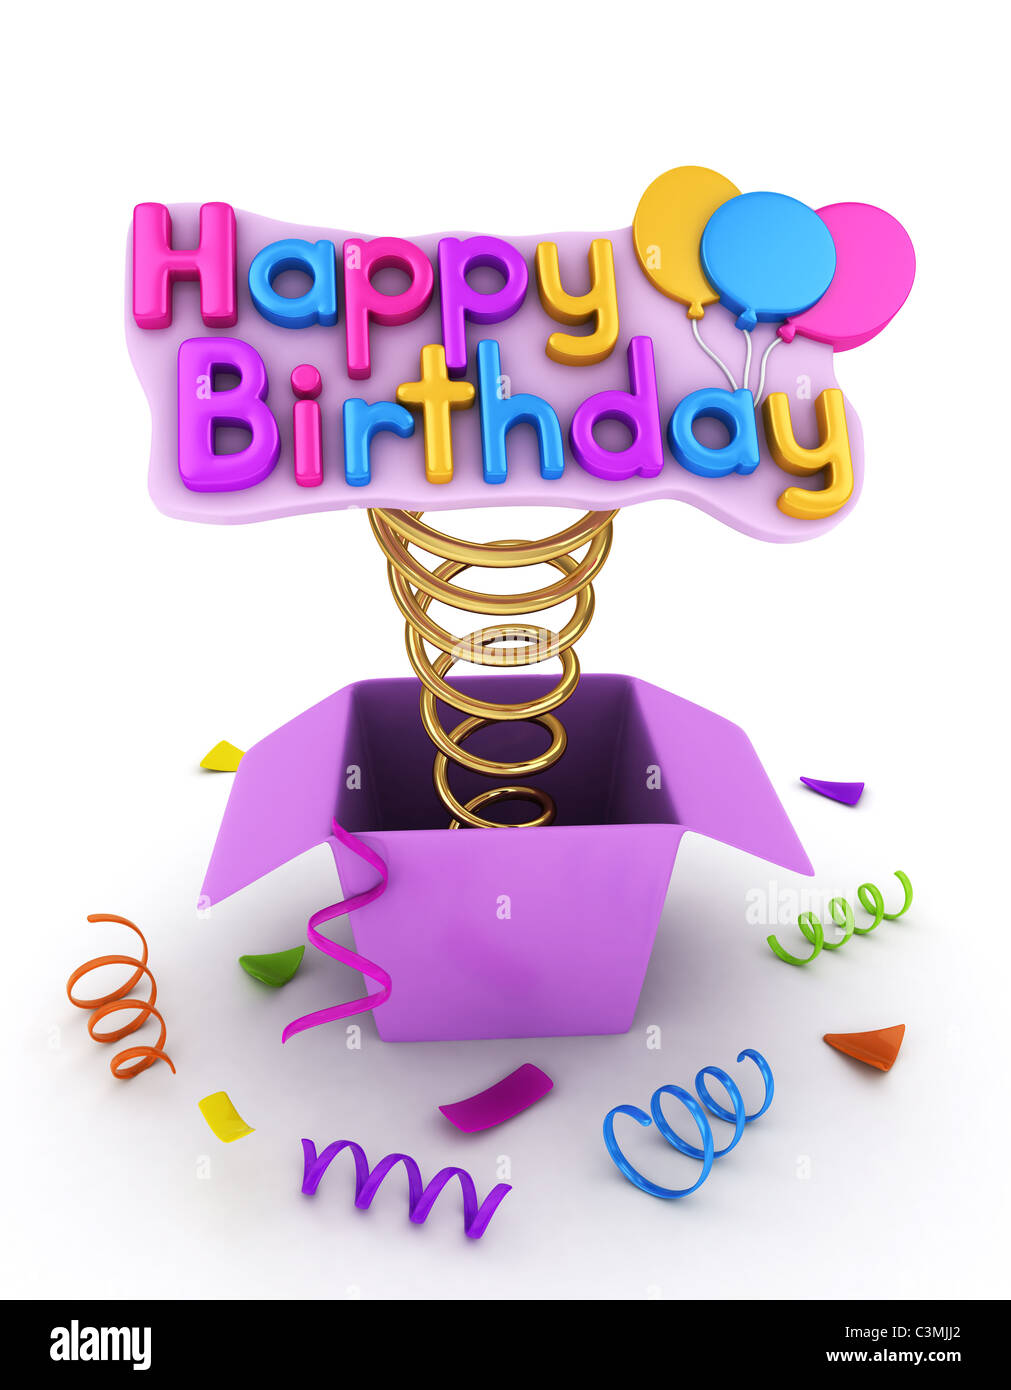 3d Illustration Of A Gift Box With A Pop Up Happy Birthday Message Stock Photo Alamy